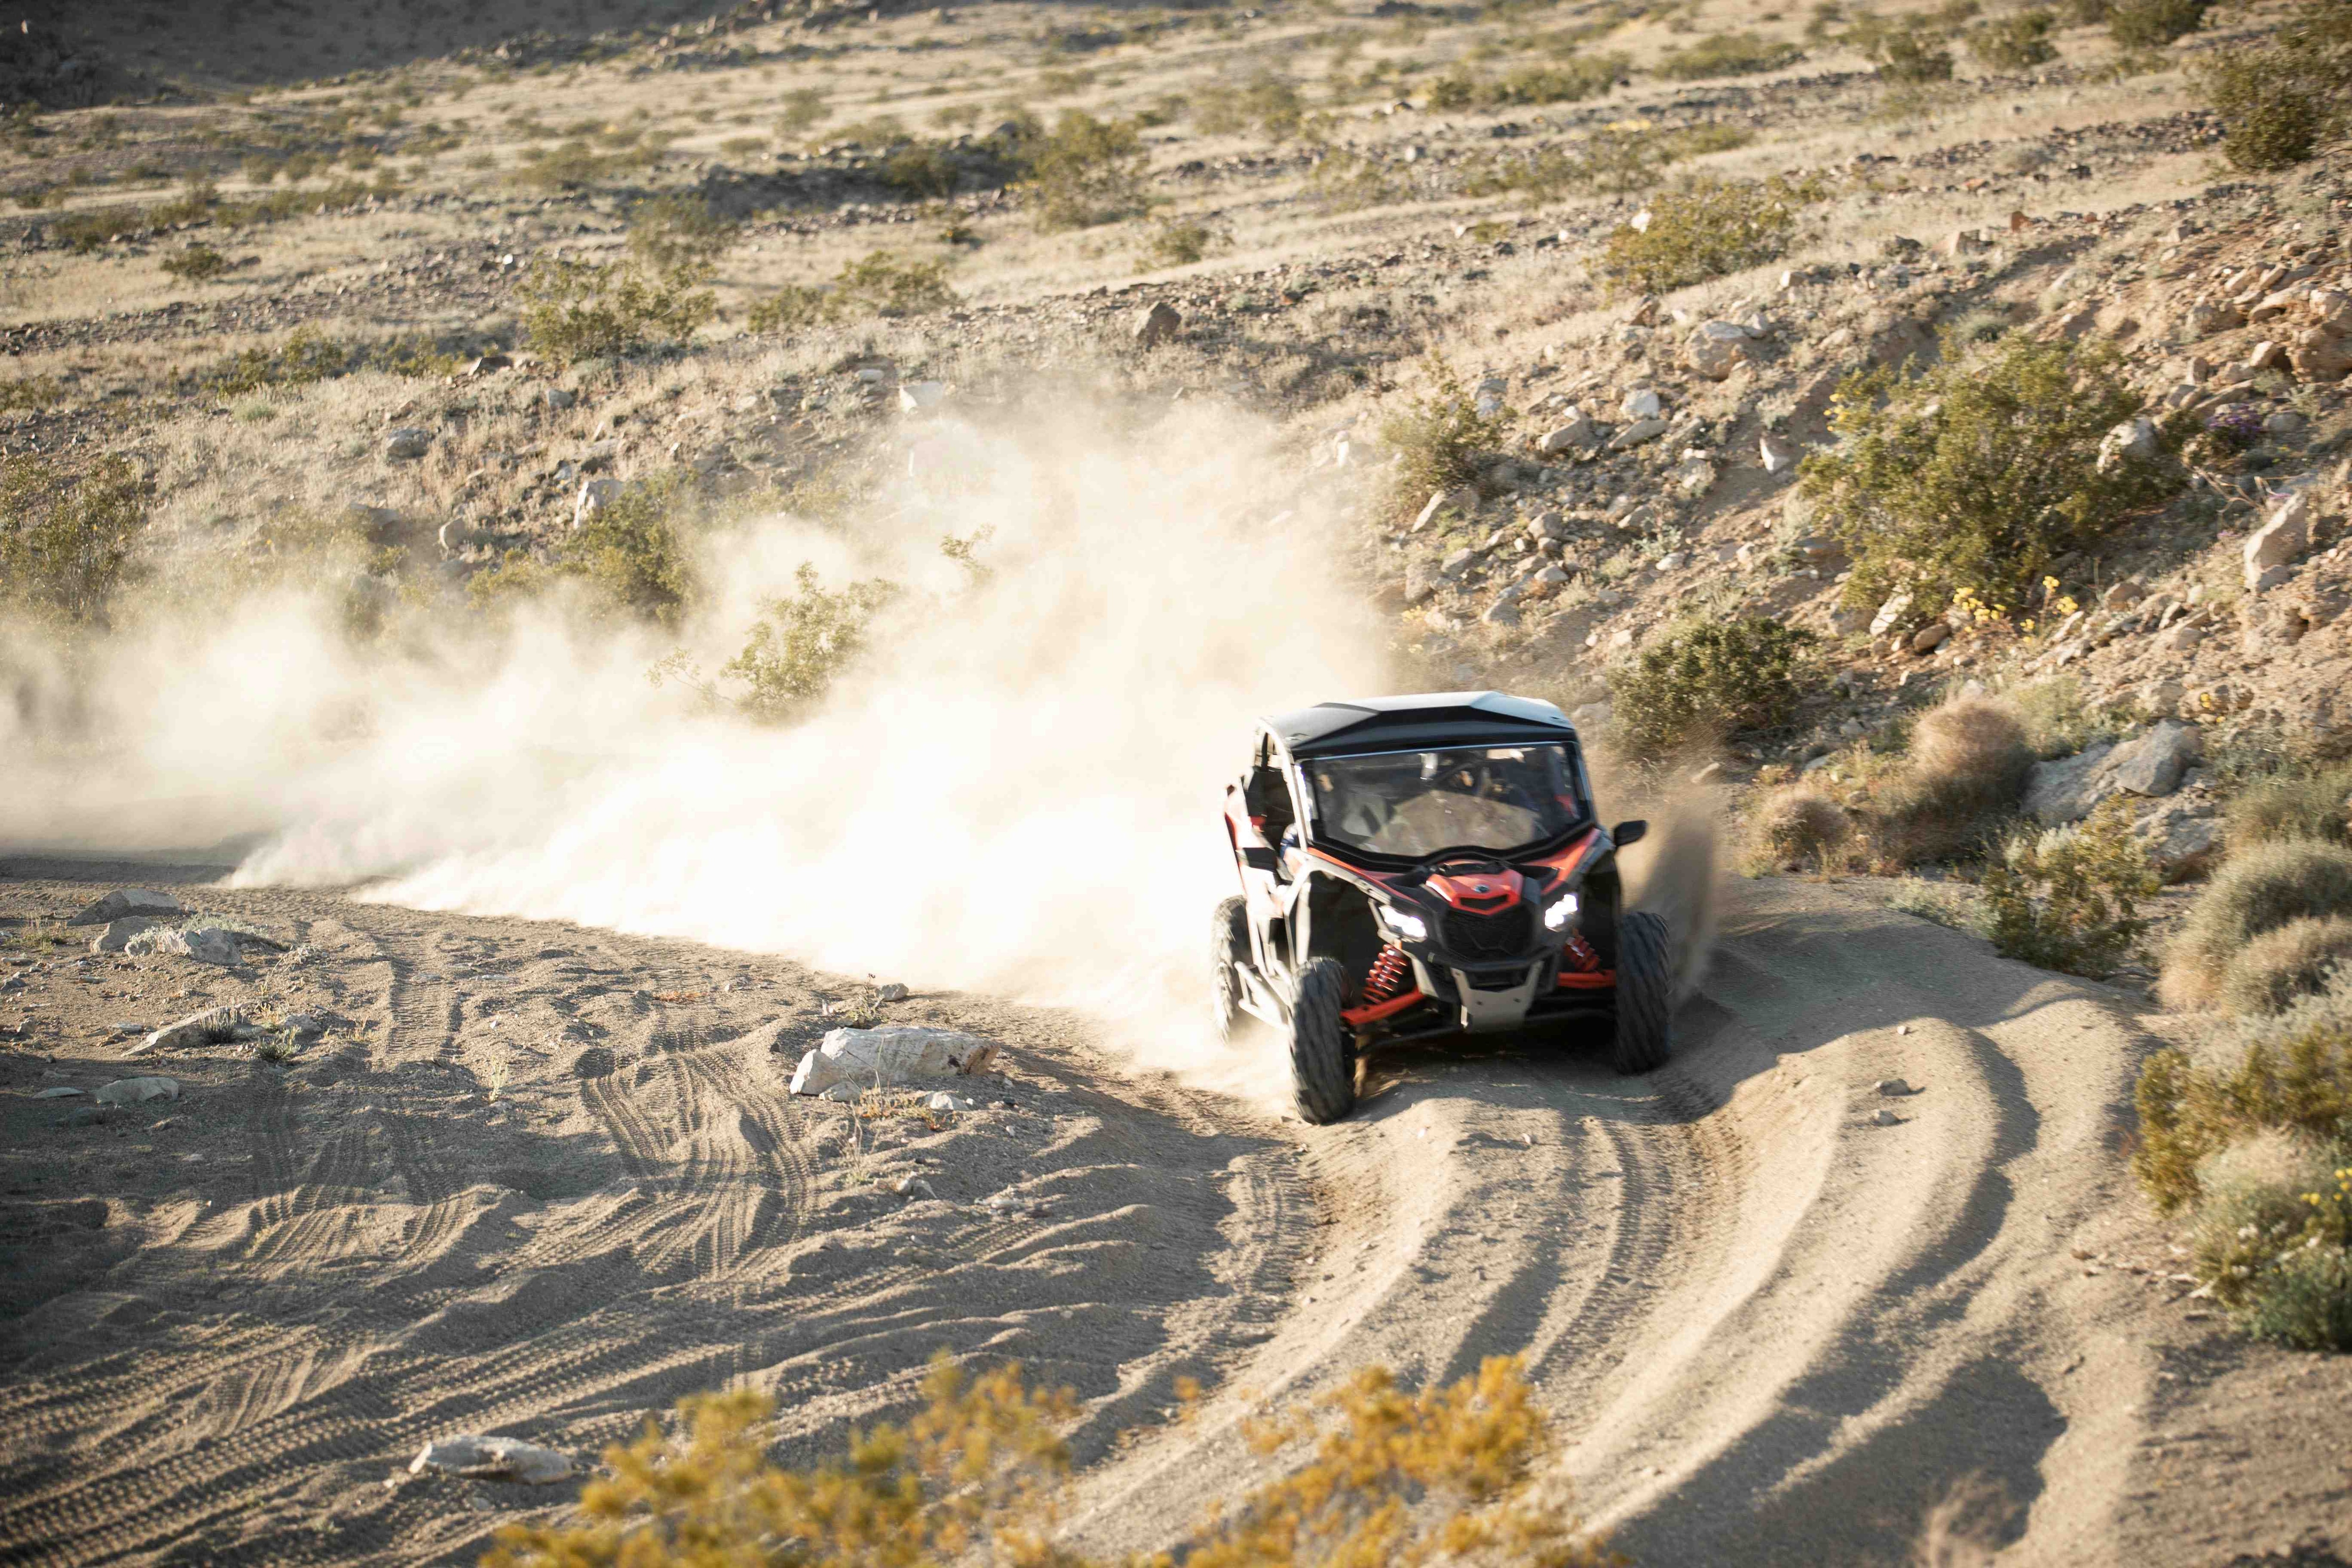 Can-Am Maverick X3 riding in the sand